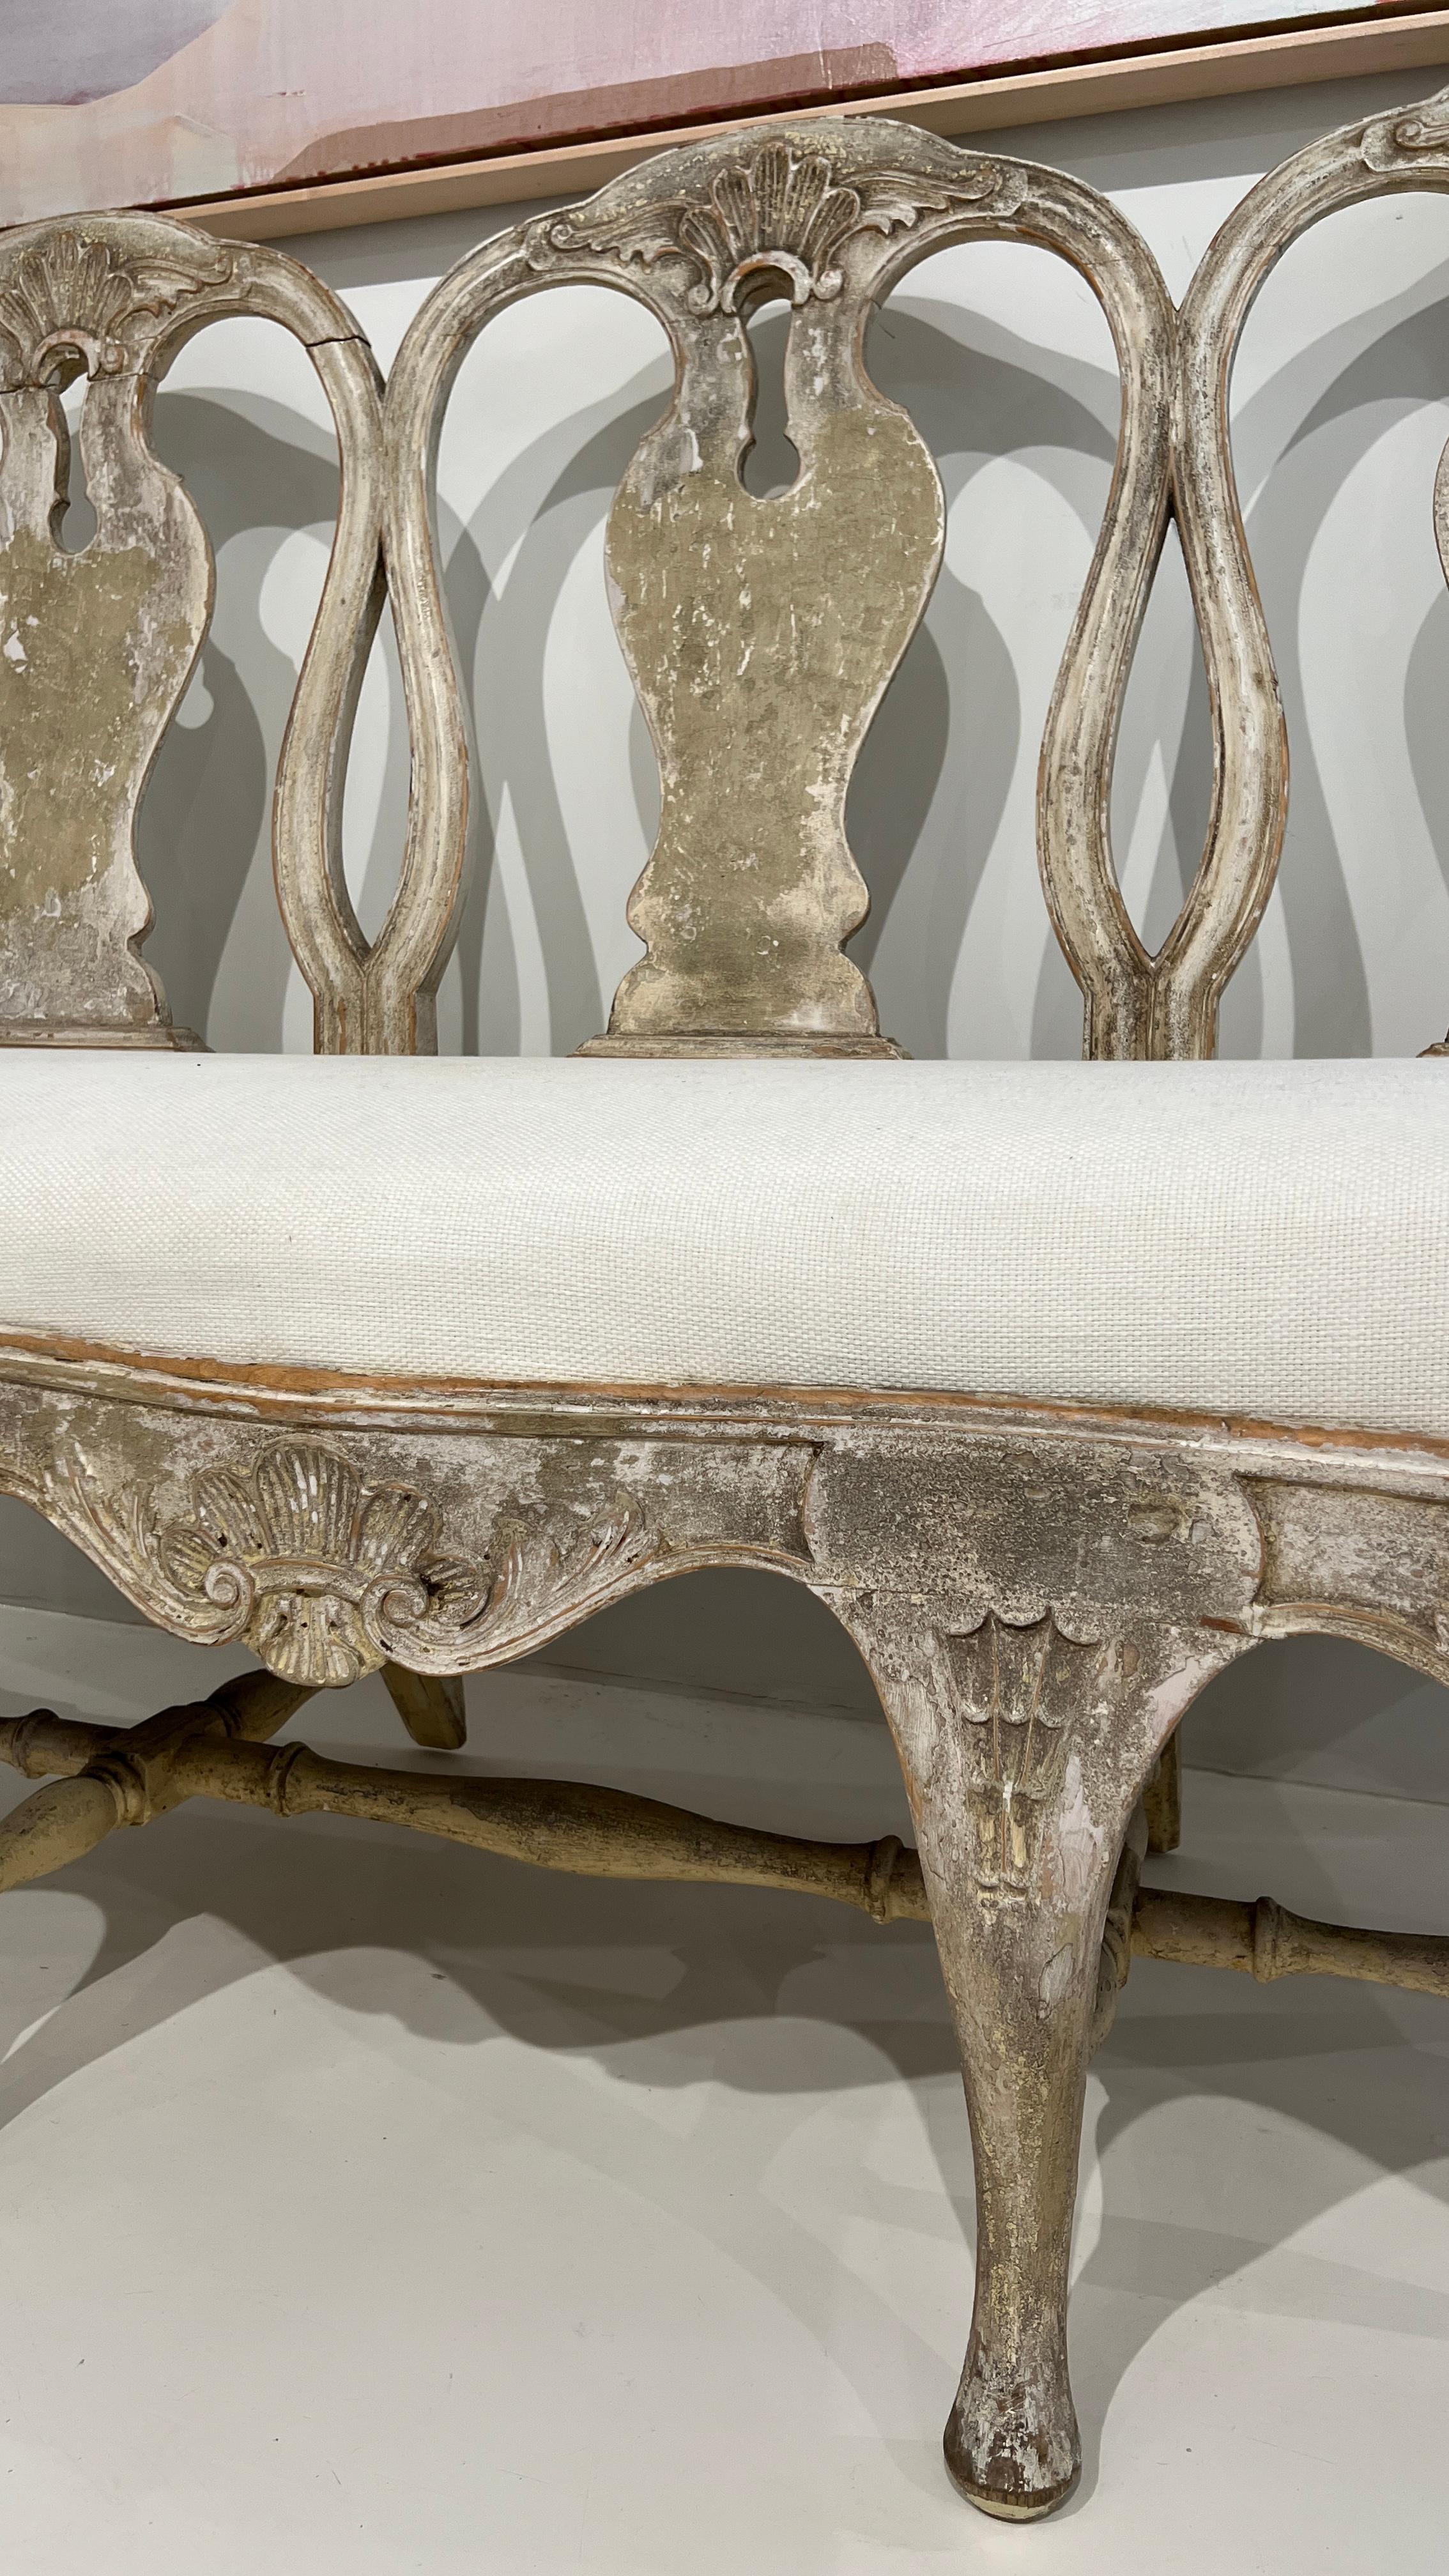 This rare and iconic 18th century Swedish Rococo Bench makes for quite the statement piece. Featuring light color of the painted wood along with the elegant keyholes. 